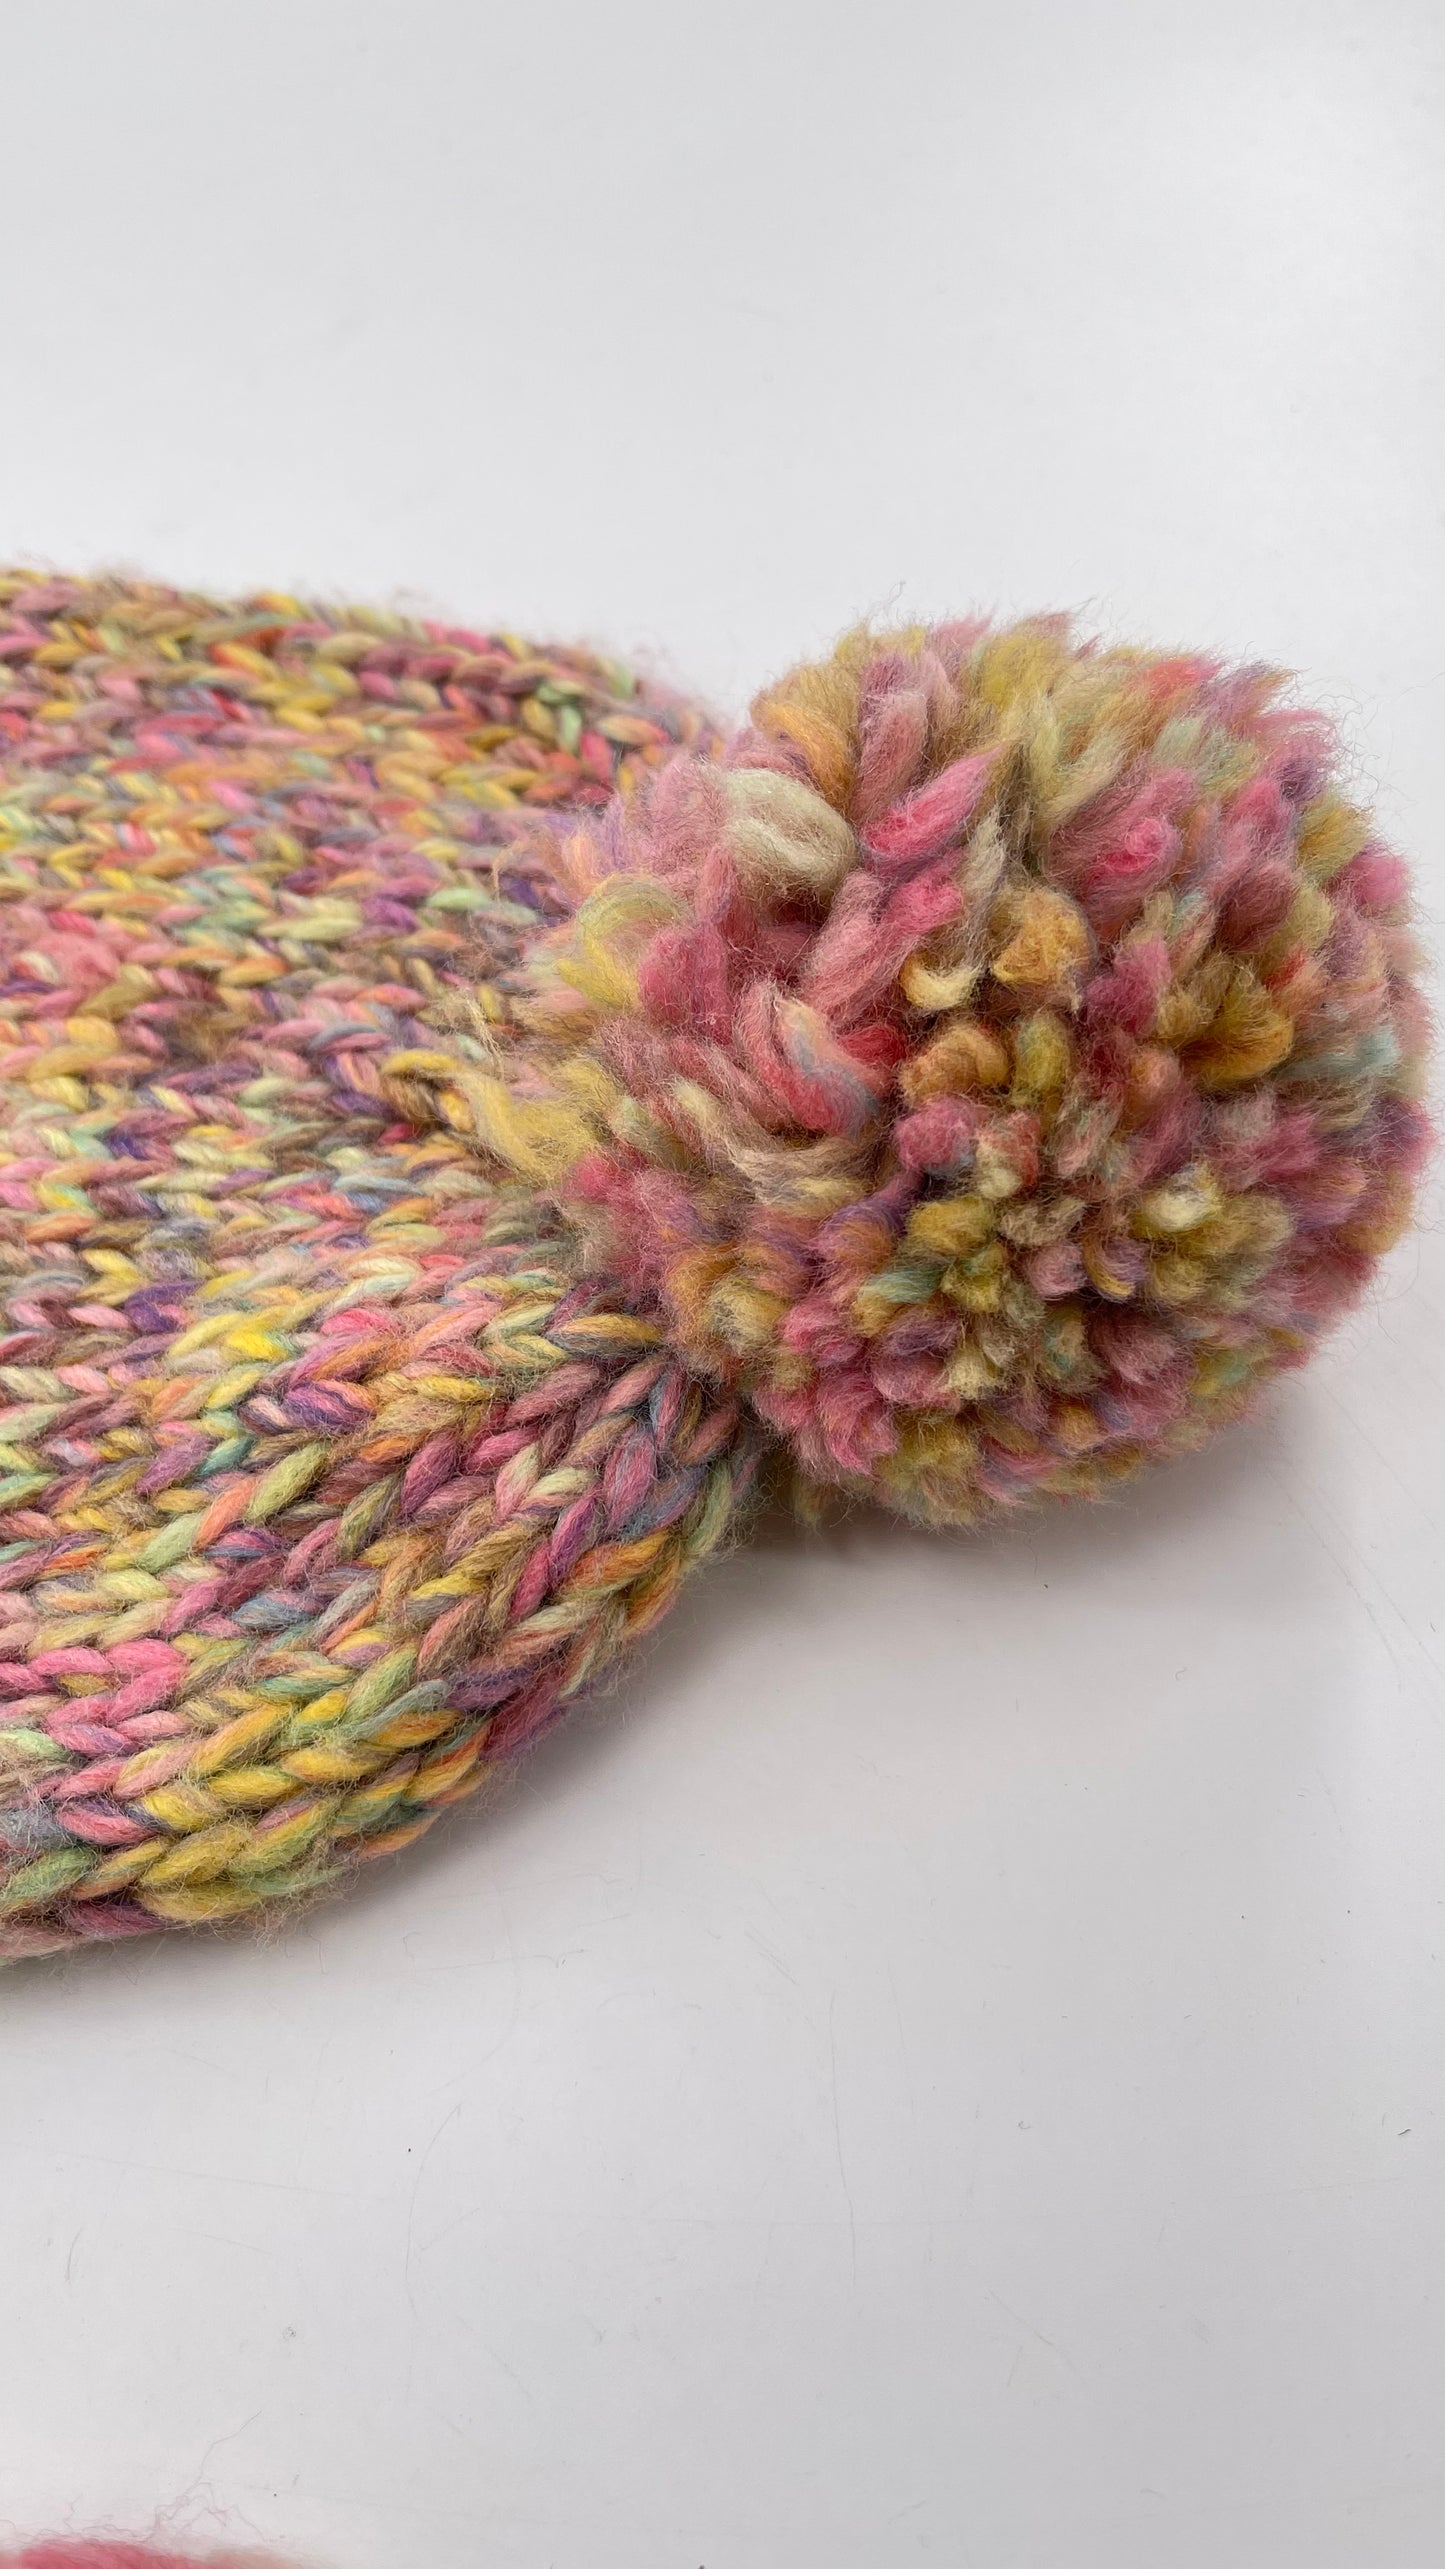 Free People Multicolored Knit Winter Hat